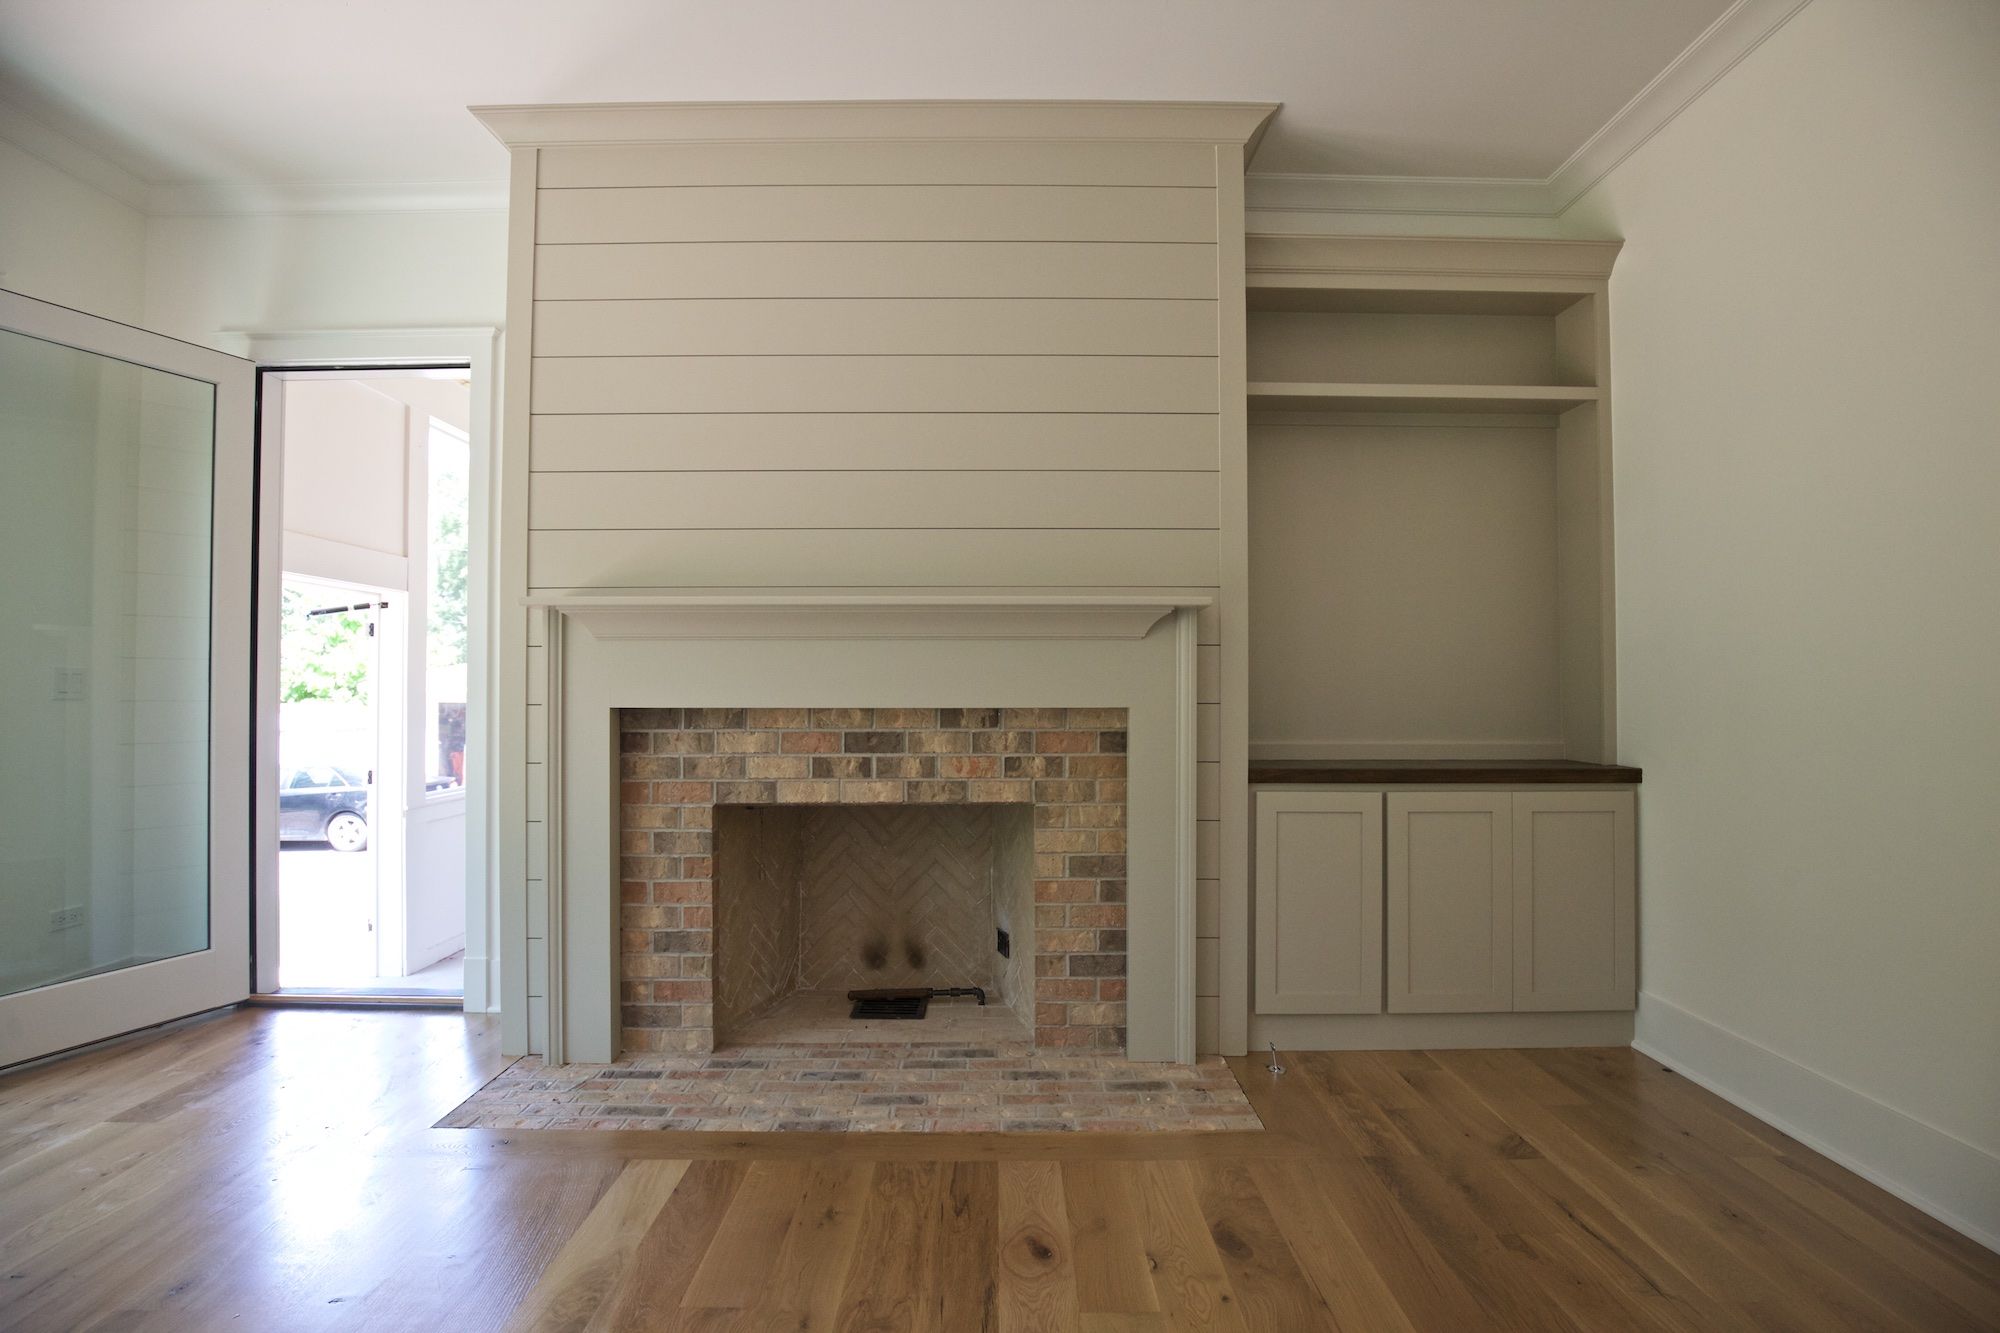 Fireplace Bookcase Inspirational Shiplap Fireplace Surround In Family Room